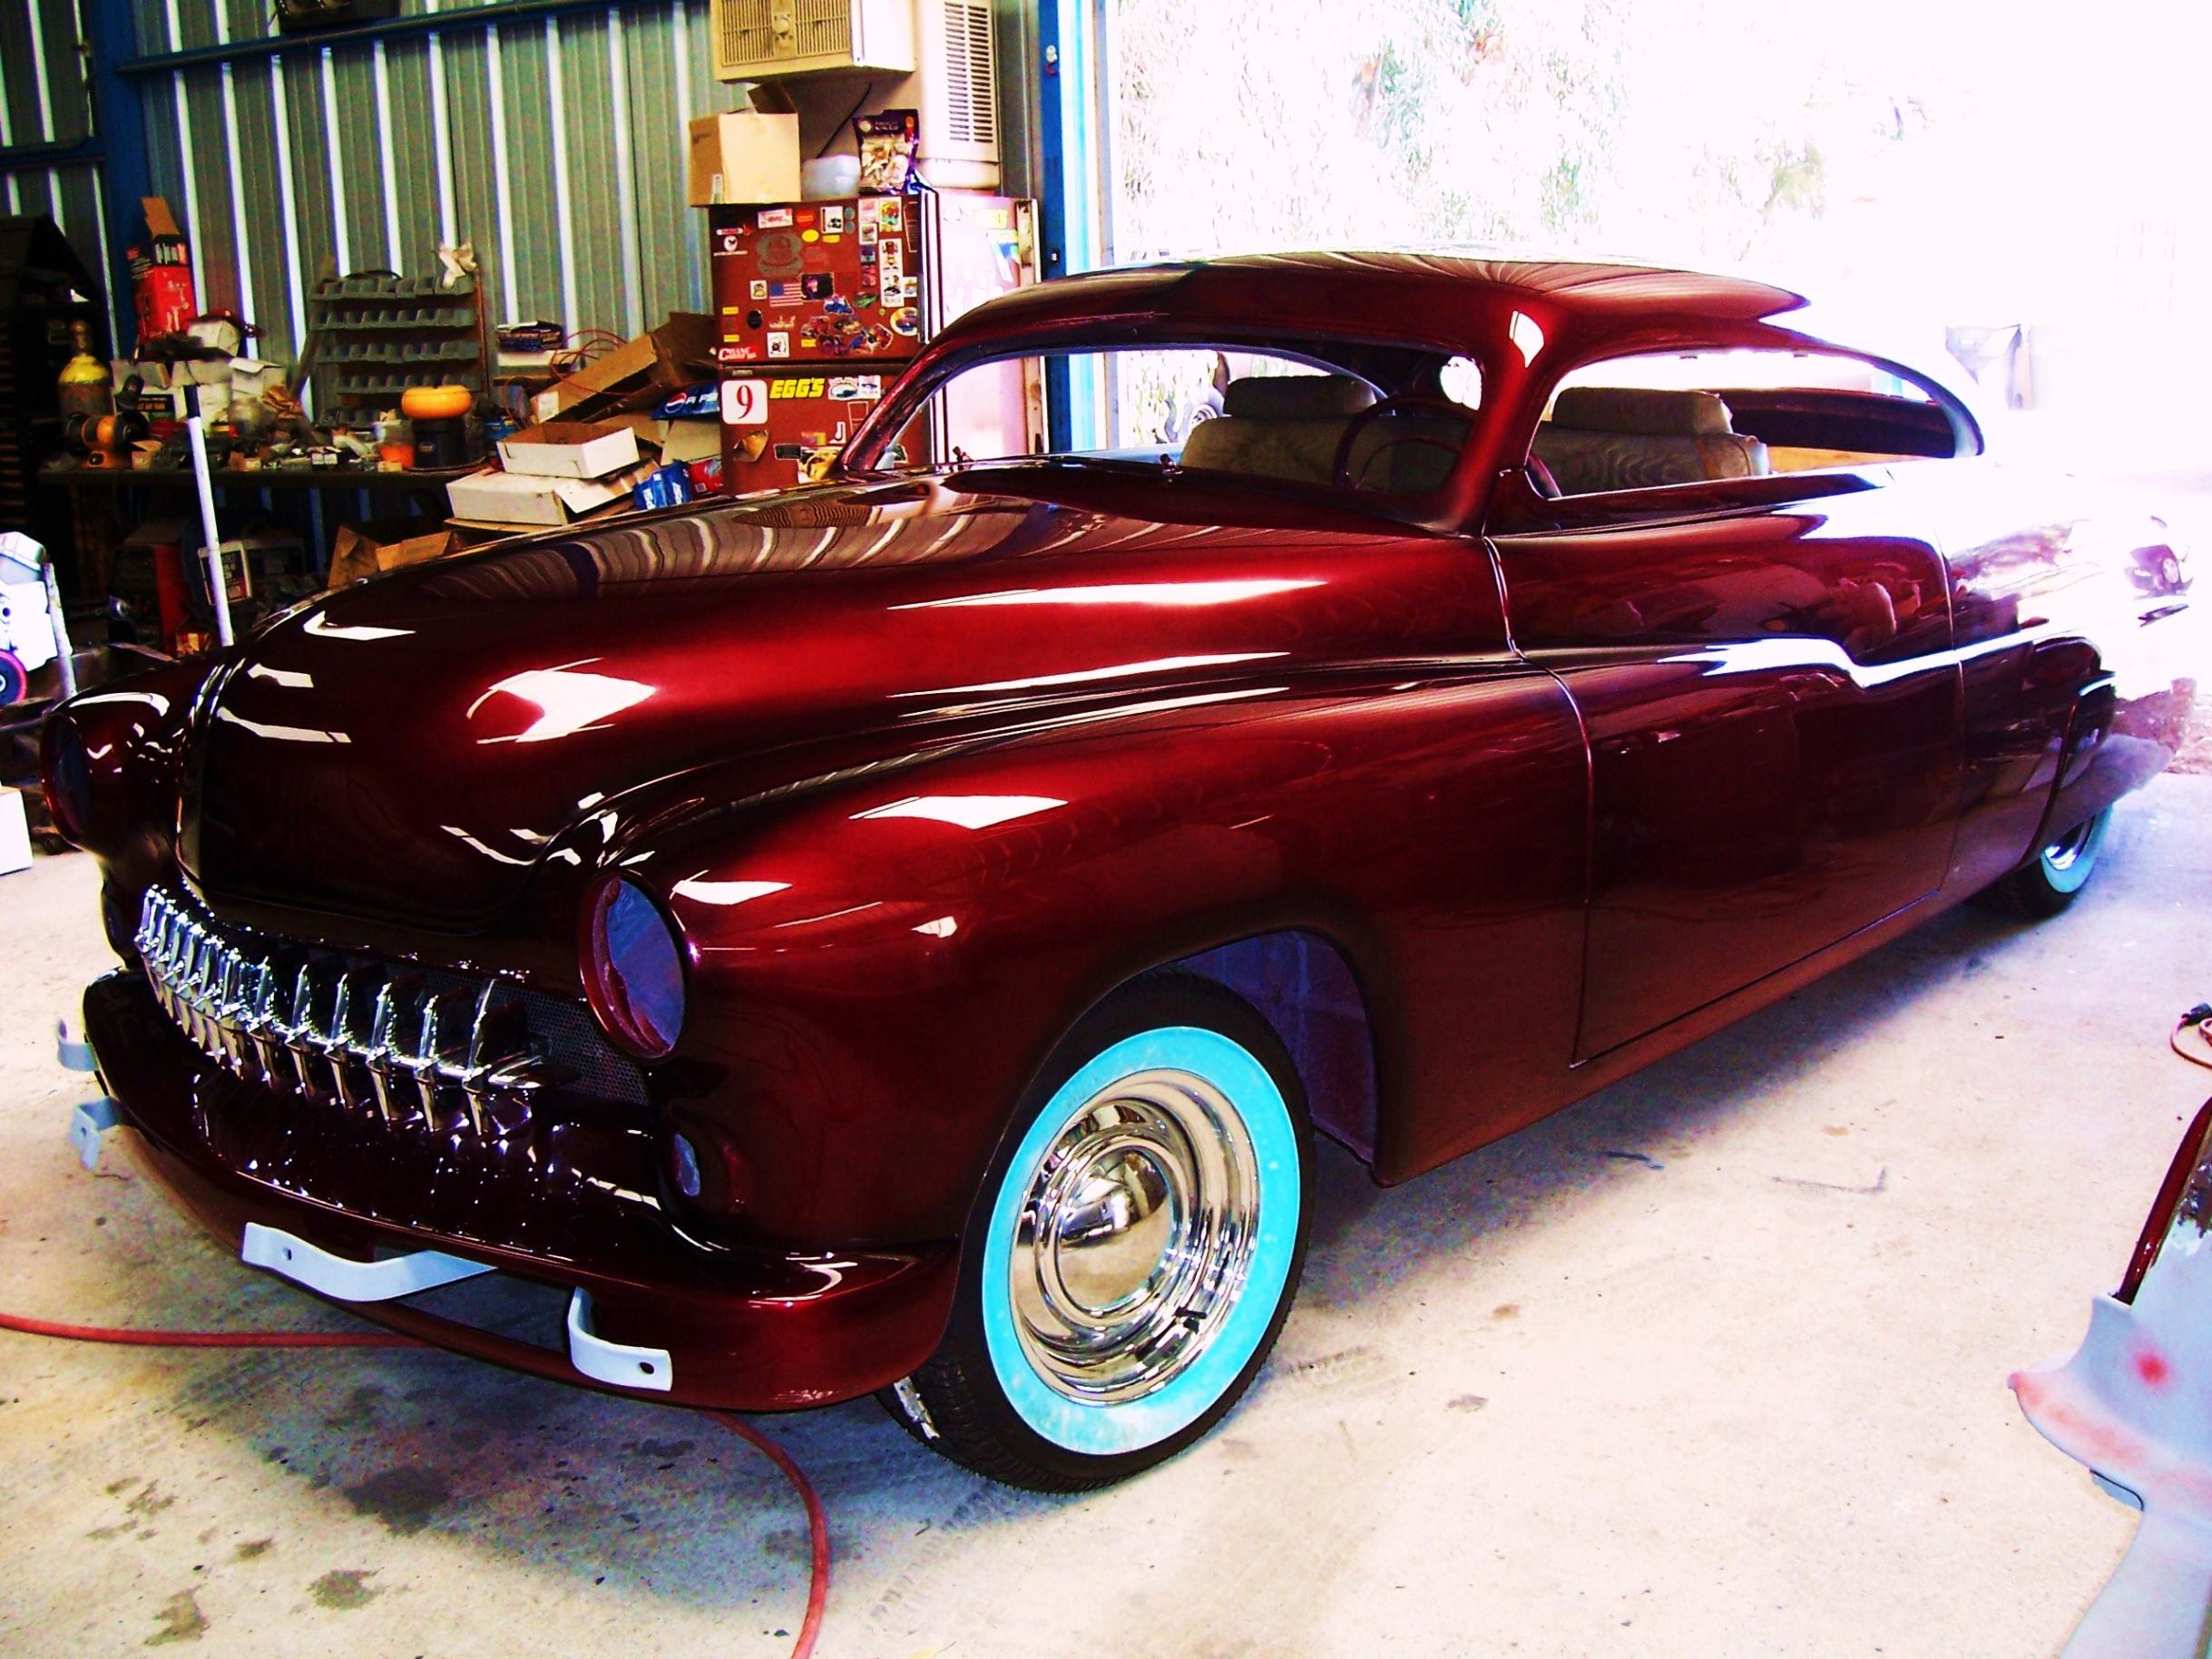 Looking for pics of Black Cherry Pearl or Candy paint jobs